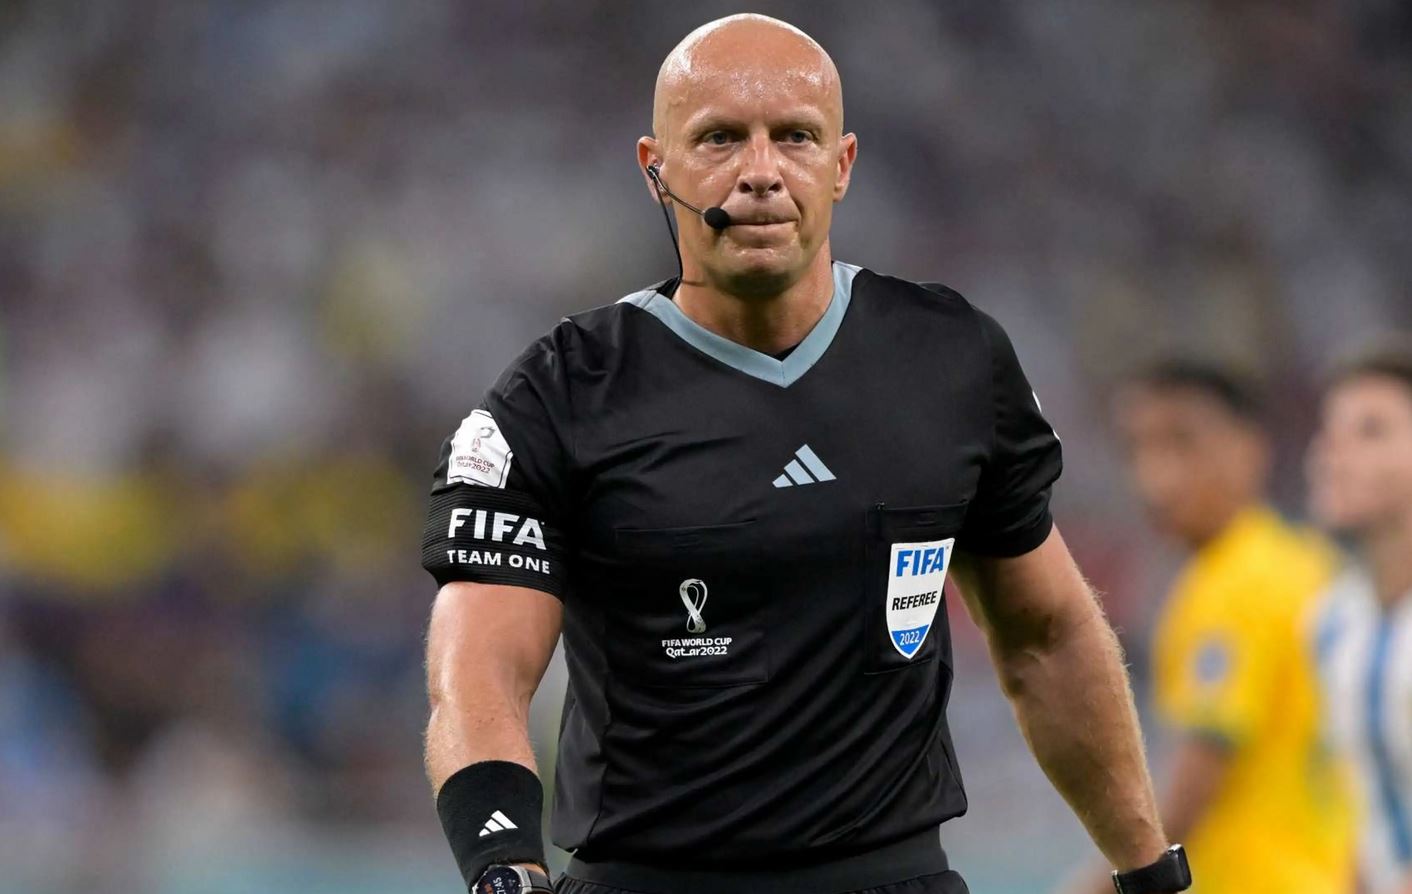 Confirmation that referee Martysiniak took charge of the European Champions Final